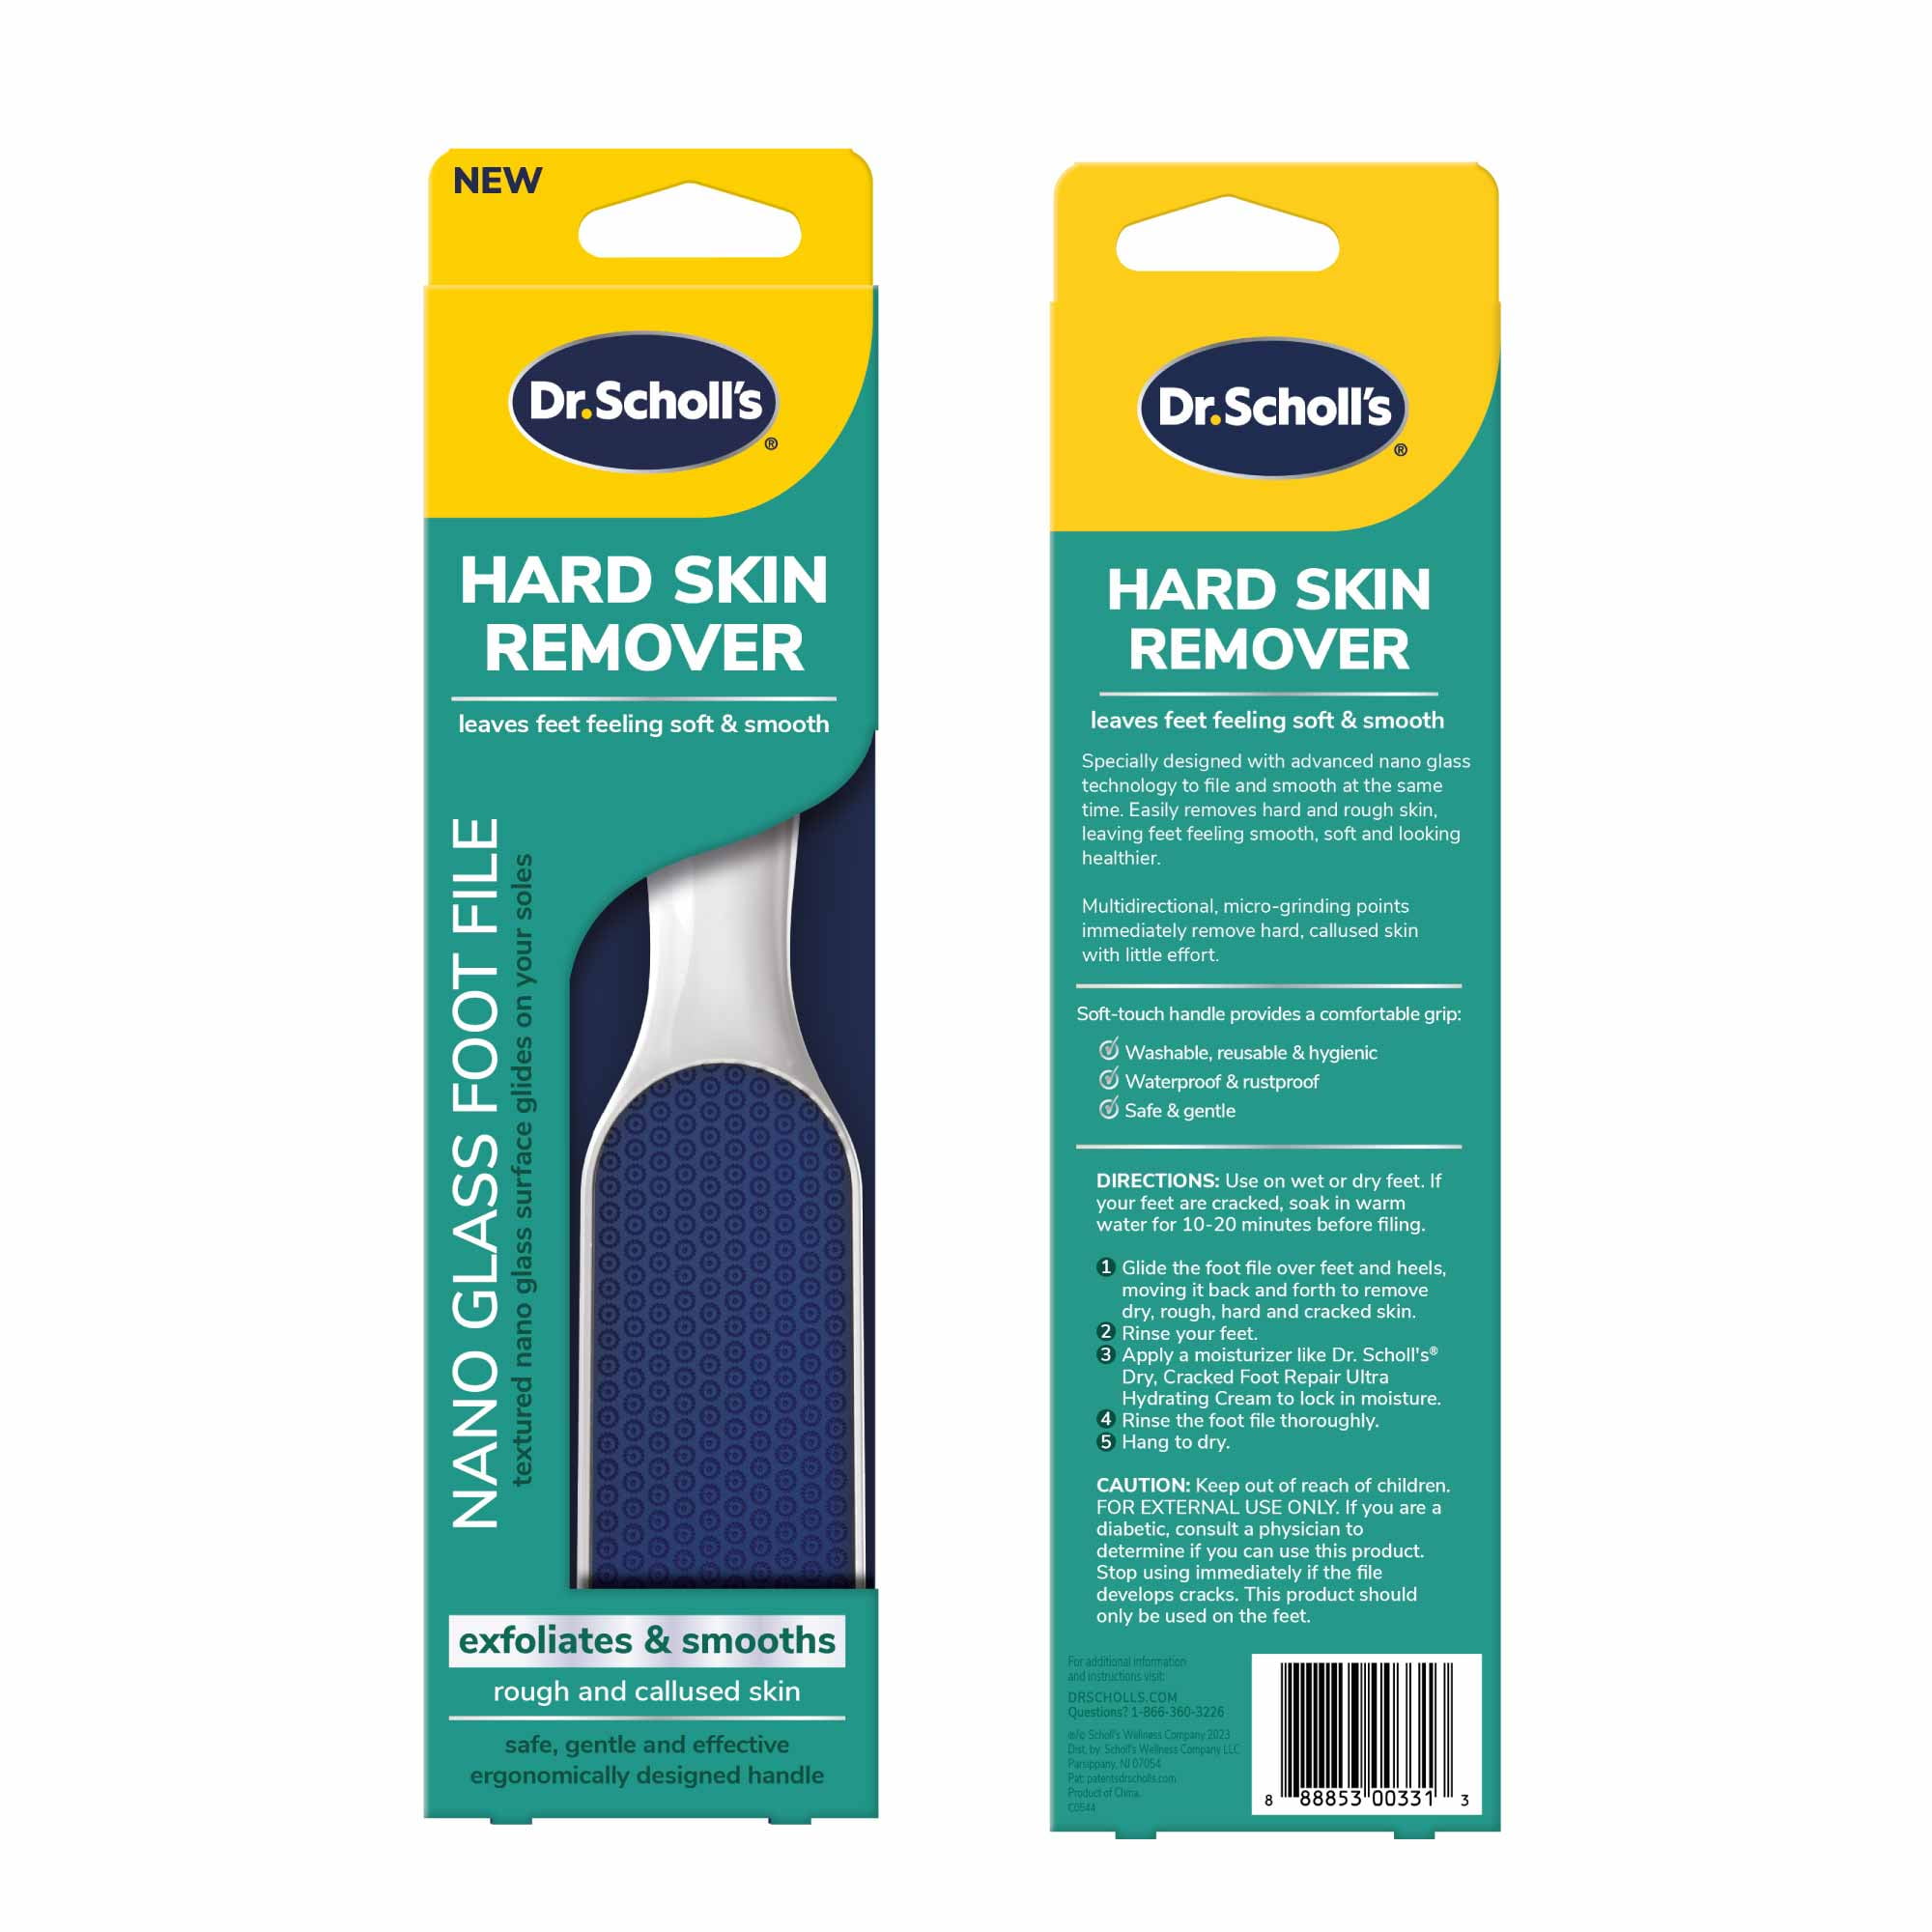 Review of Scholl Rough Skin Remover - Elegant Eves